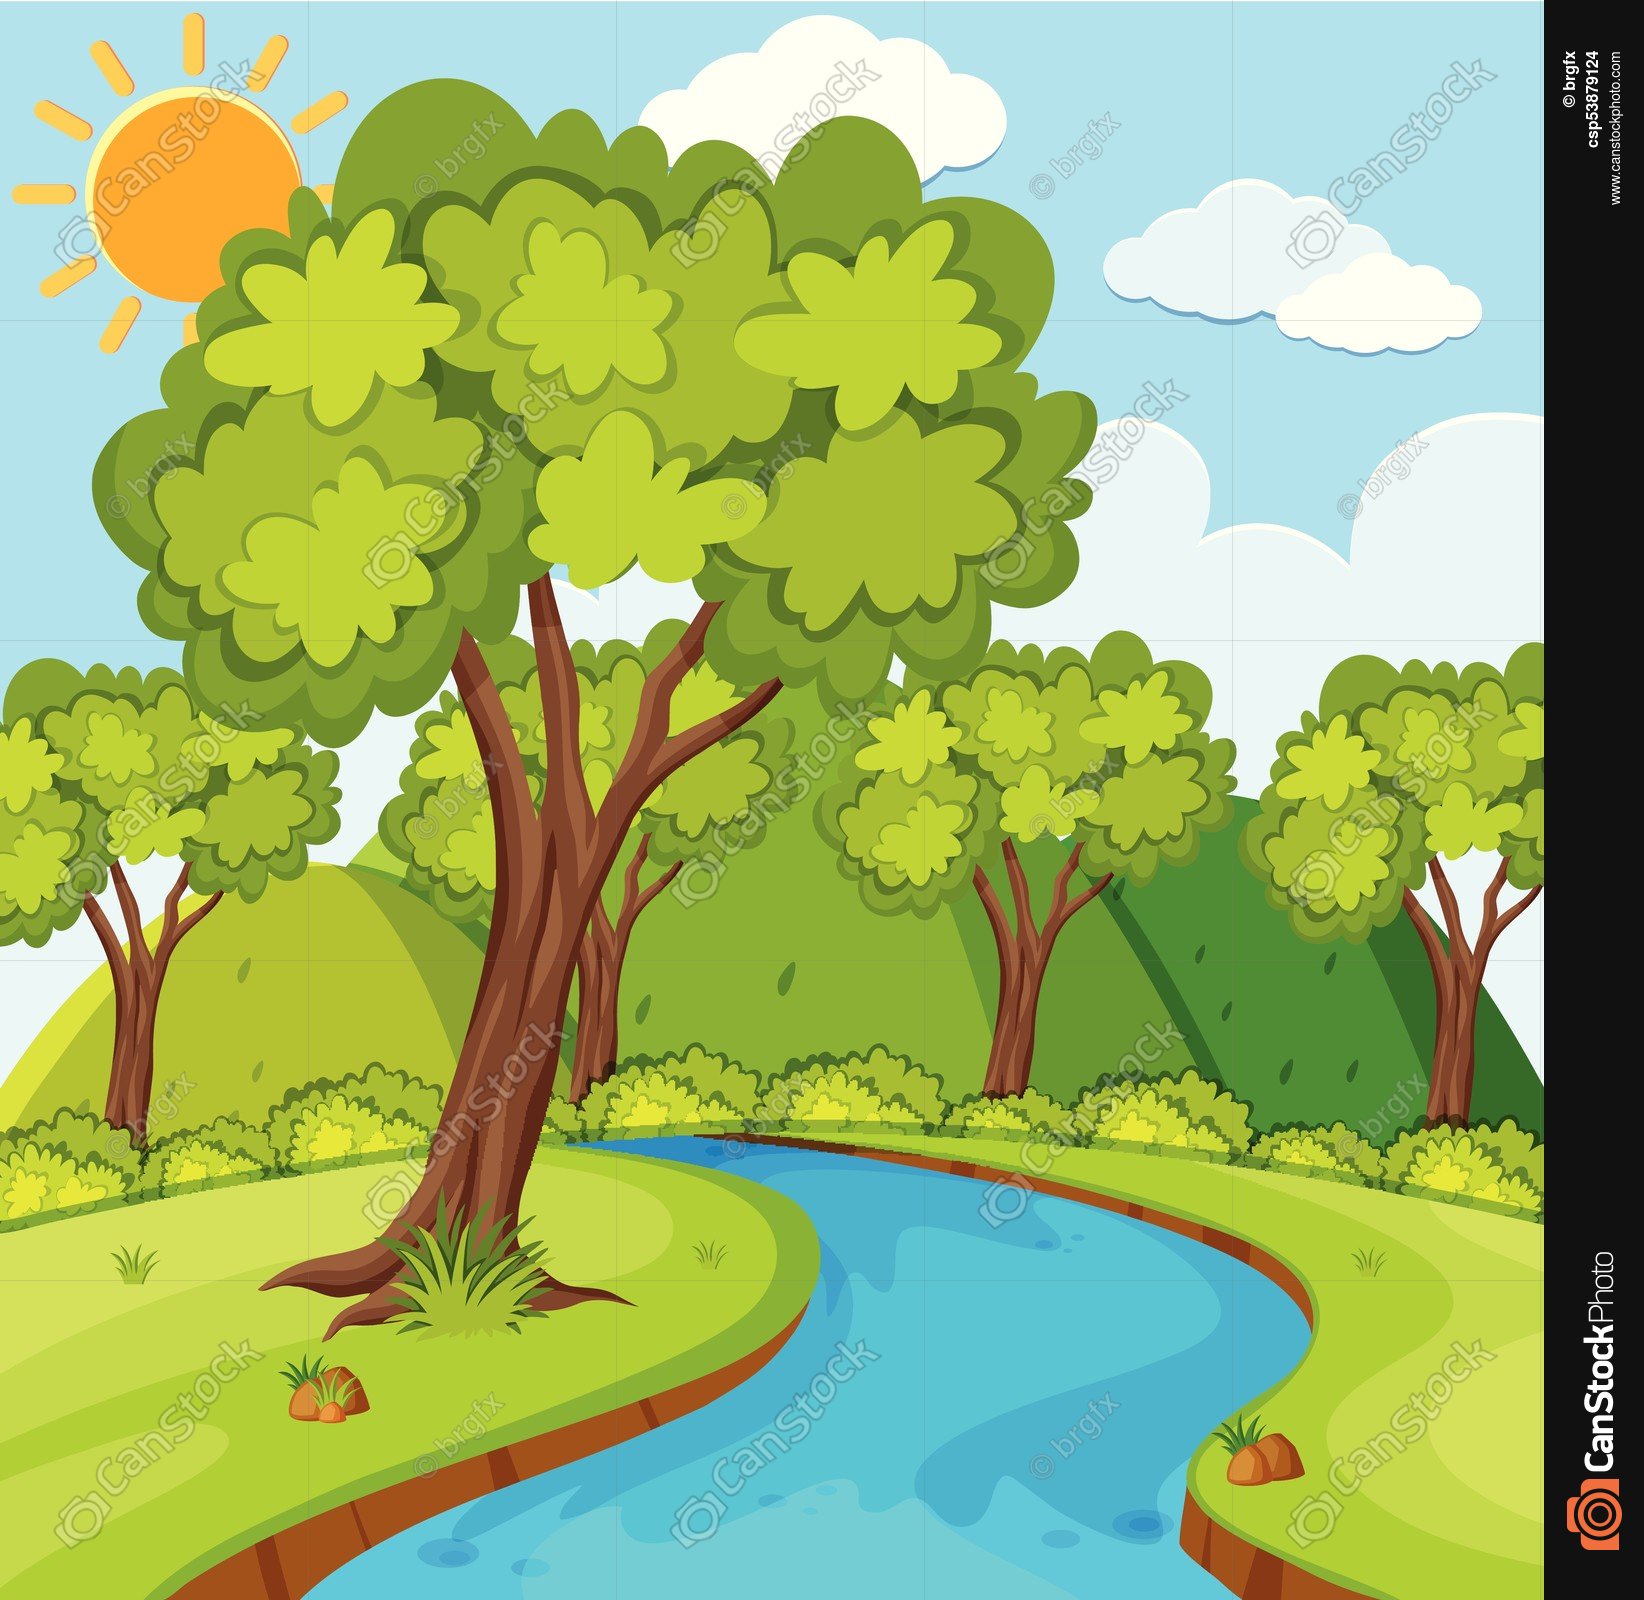 Forest scene with trees and river illustration vector illustration ...